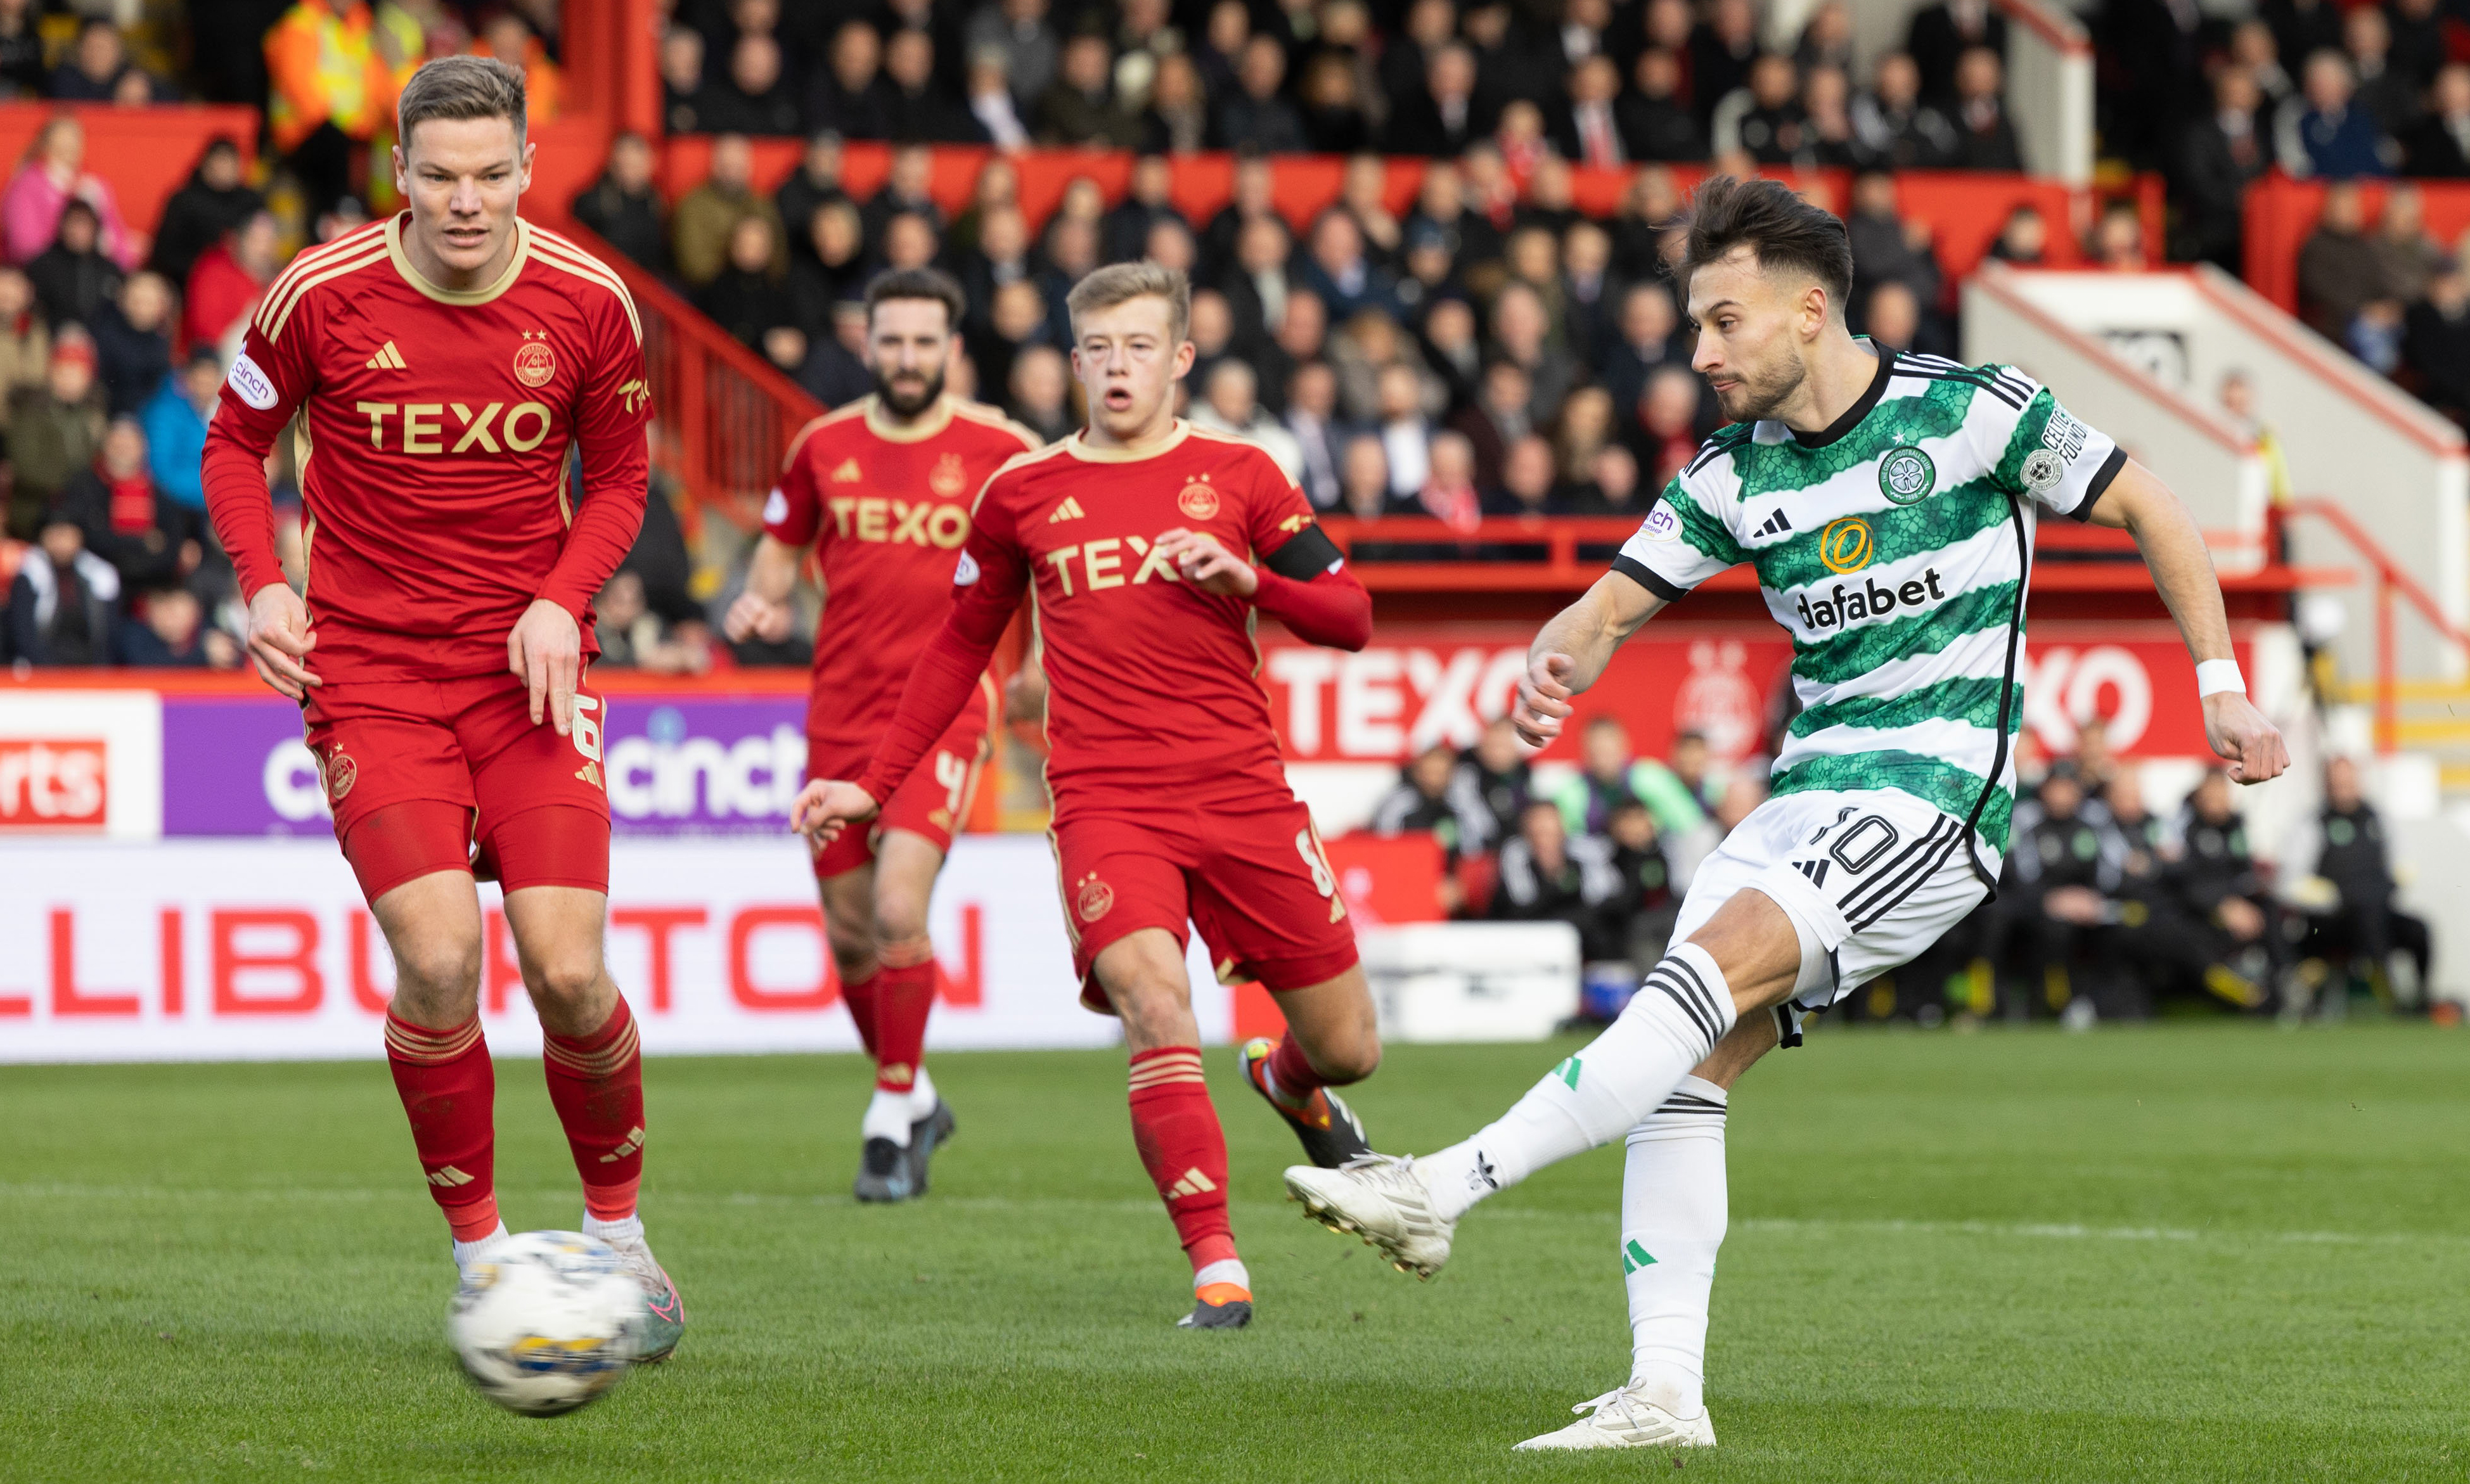 Nicolas Kuhn scores first Celtic goal to make it 1-1 after coming off the bench. (Photo by Ross Parker / SNS Group)